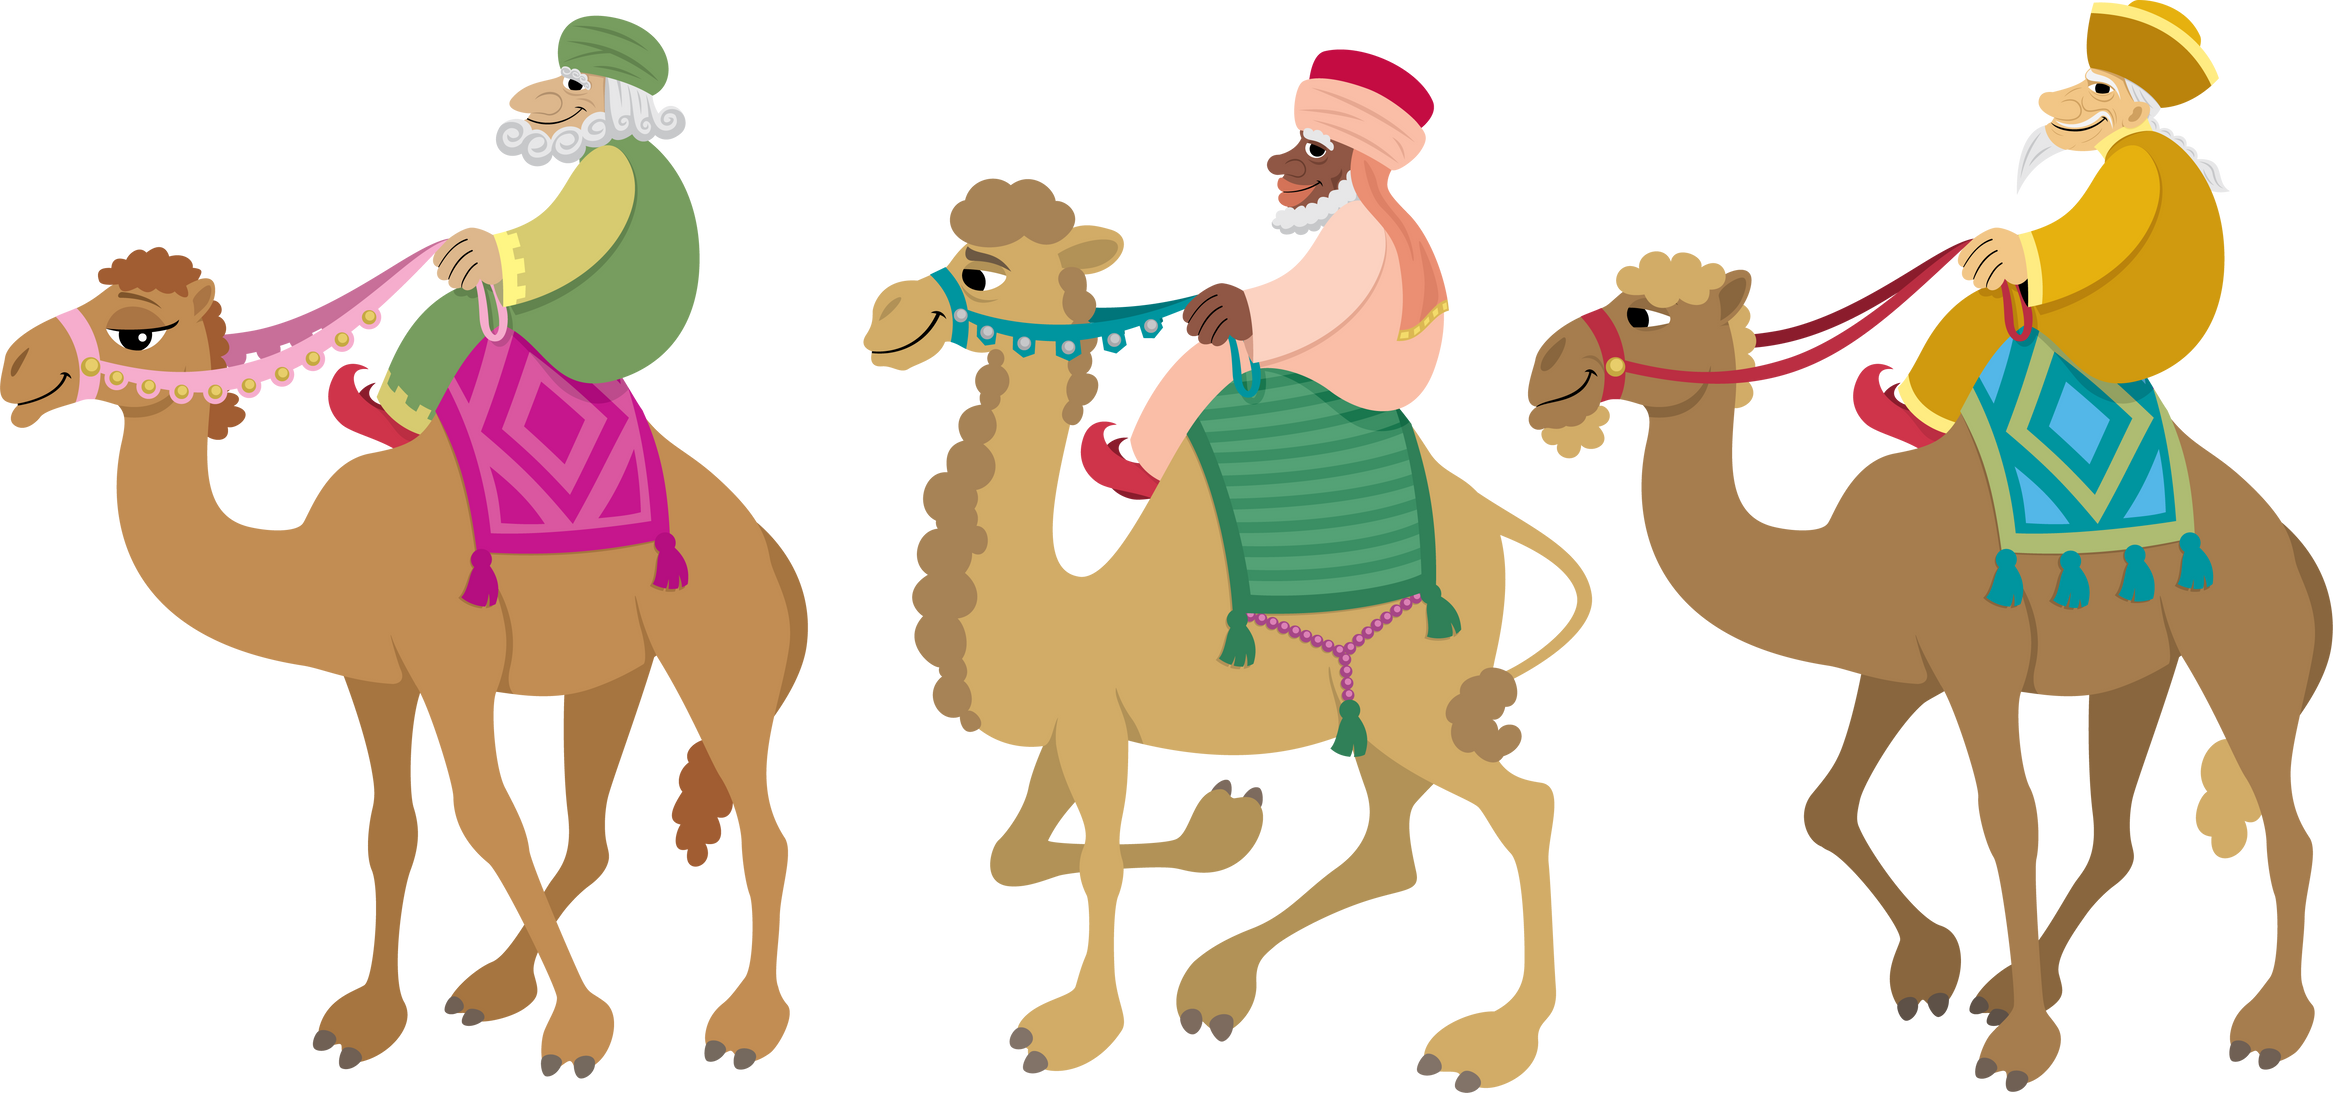 Three Wise Men Riding in Camels